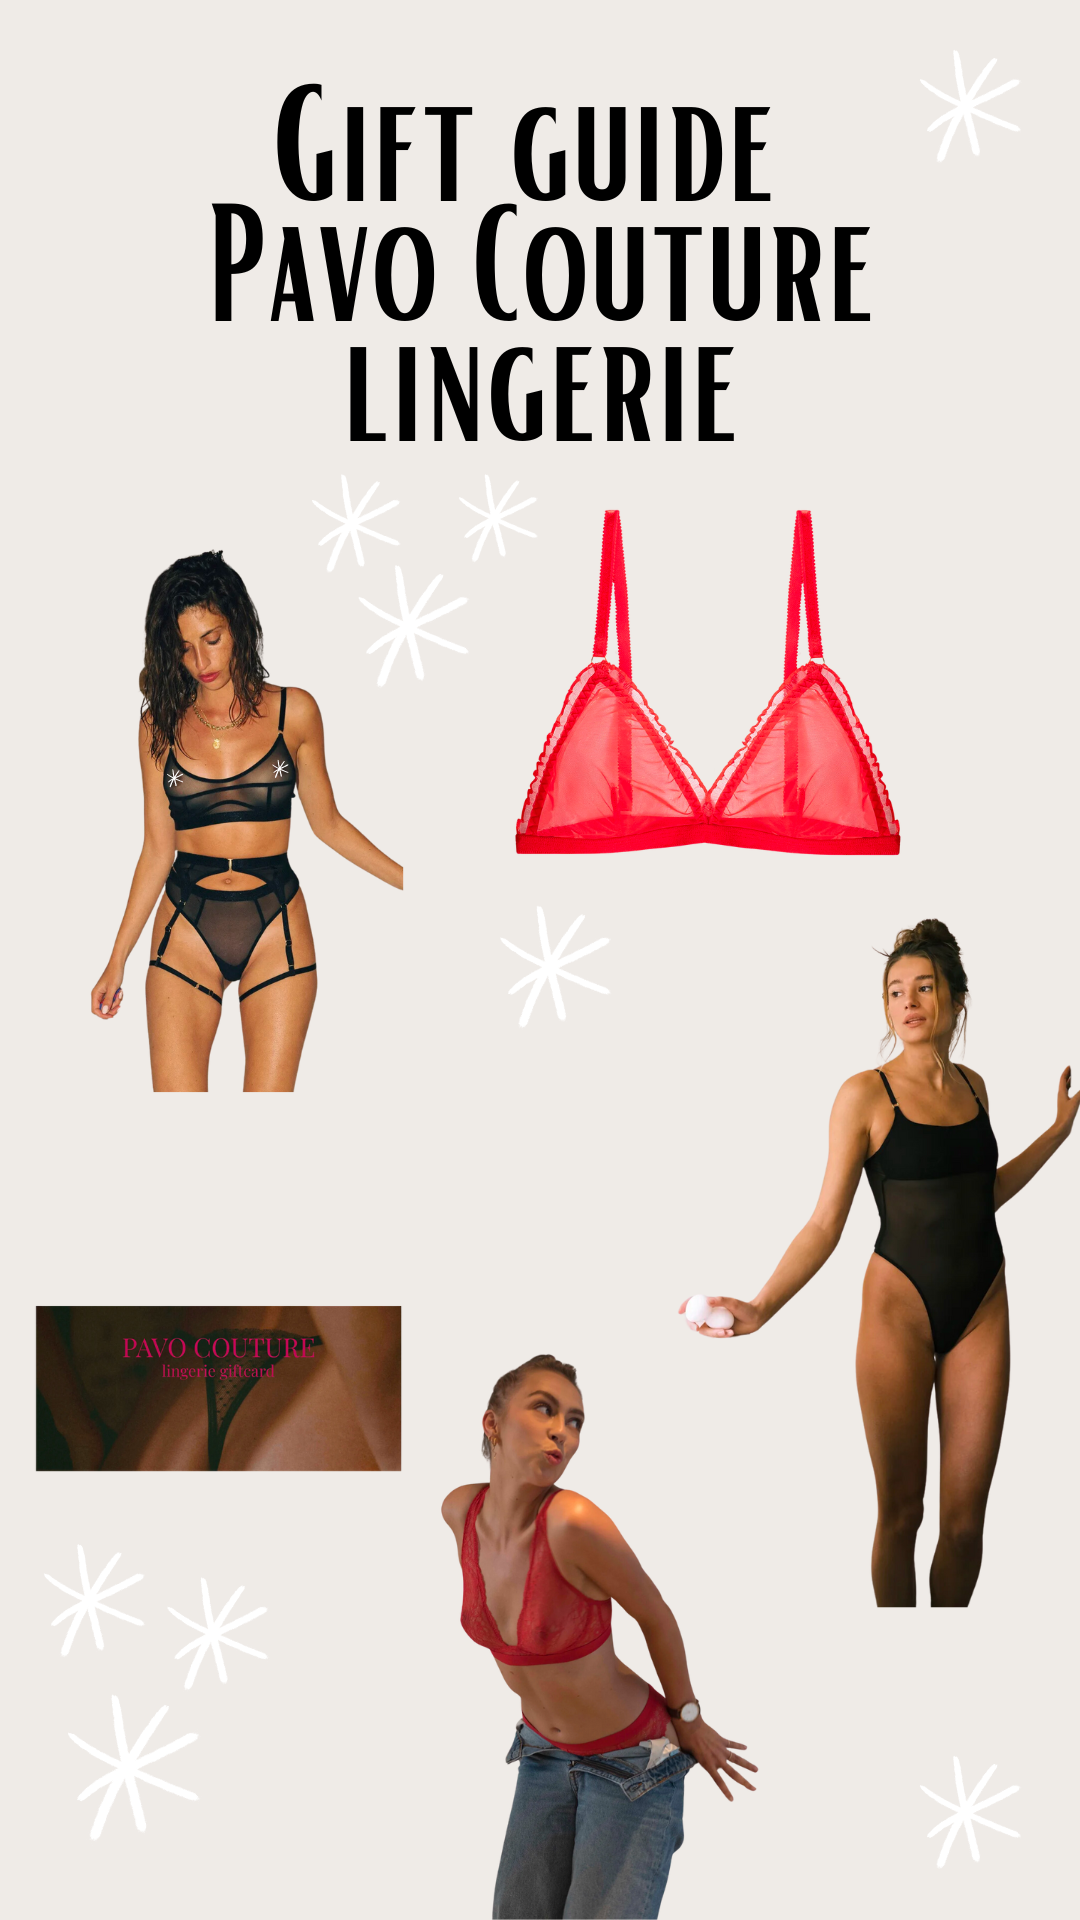 Gift guide Pavo Couture lingerie